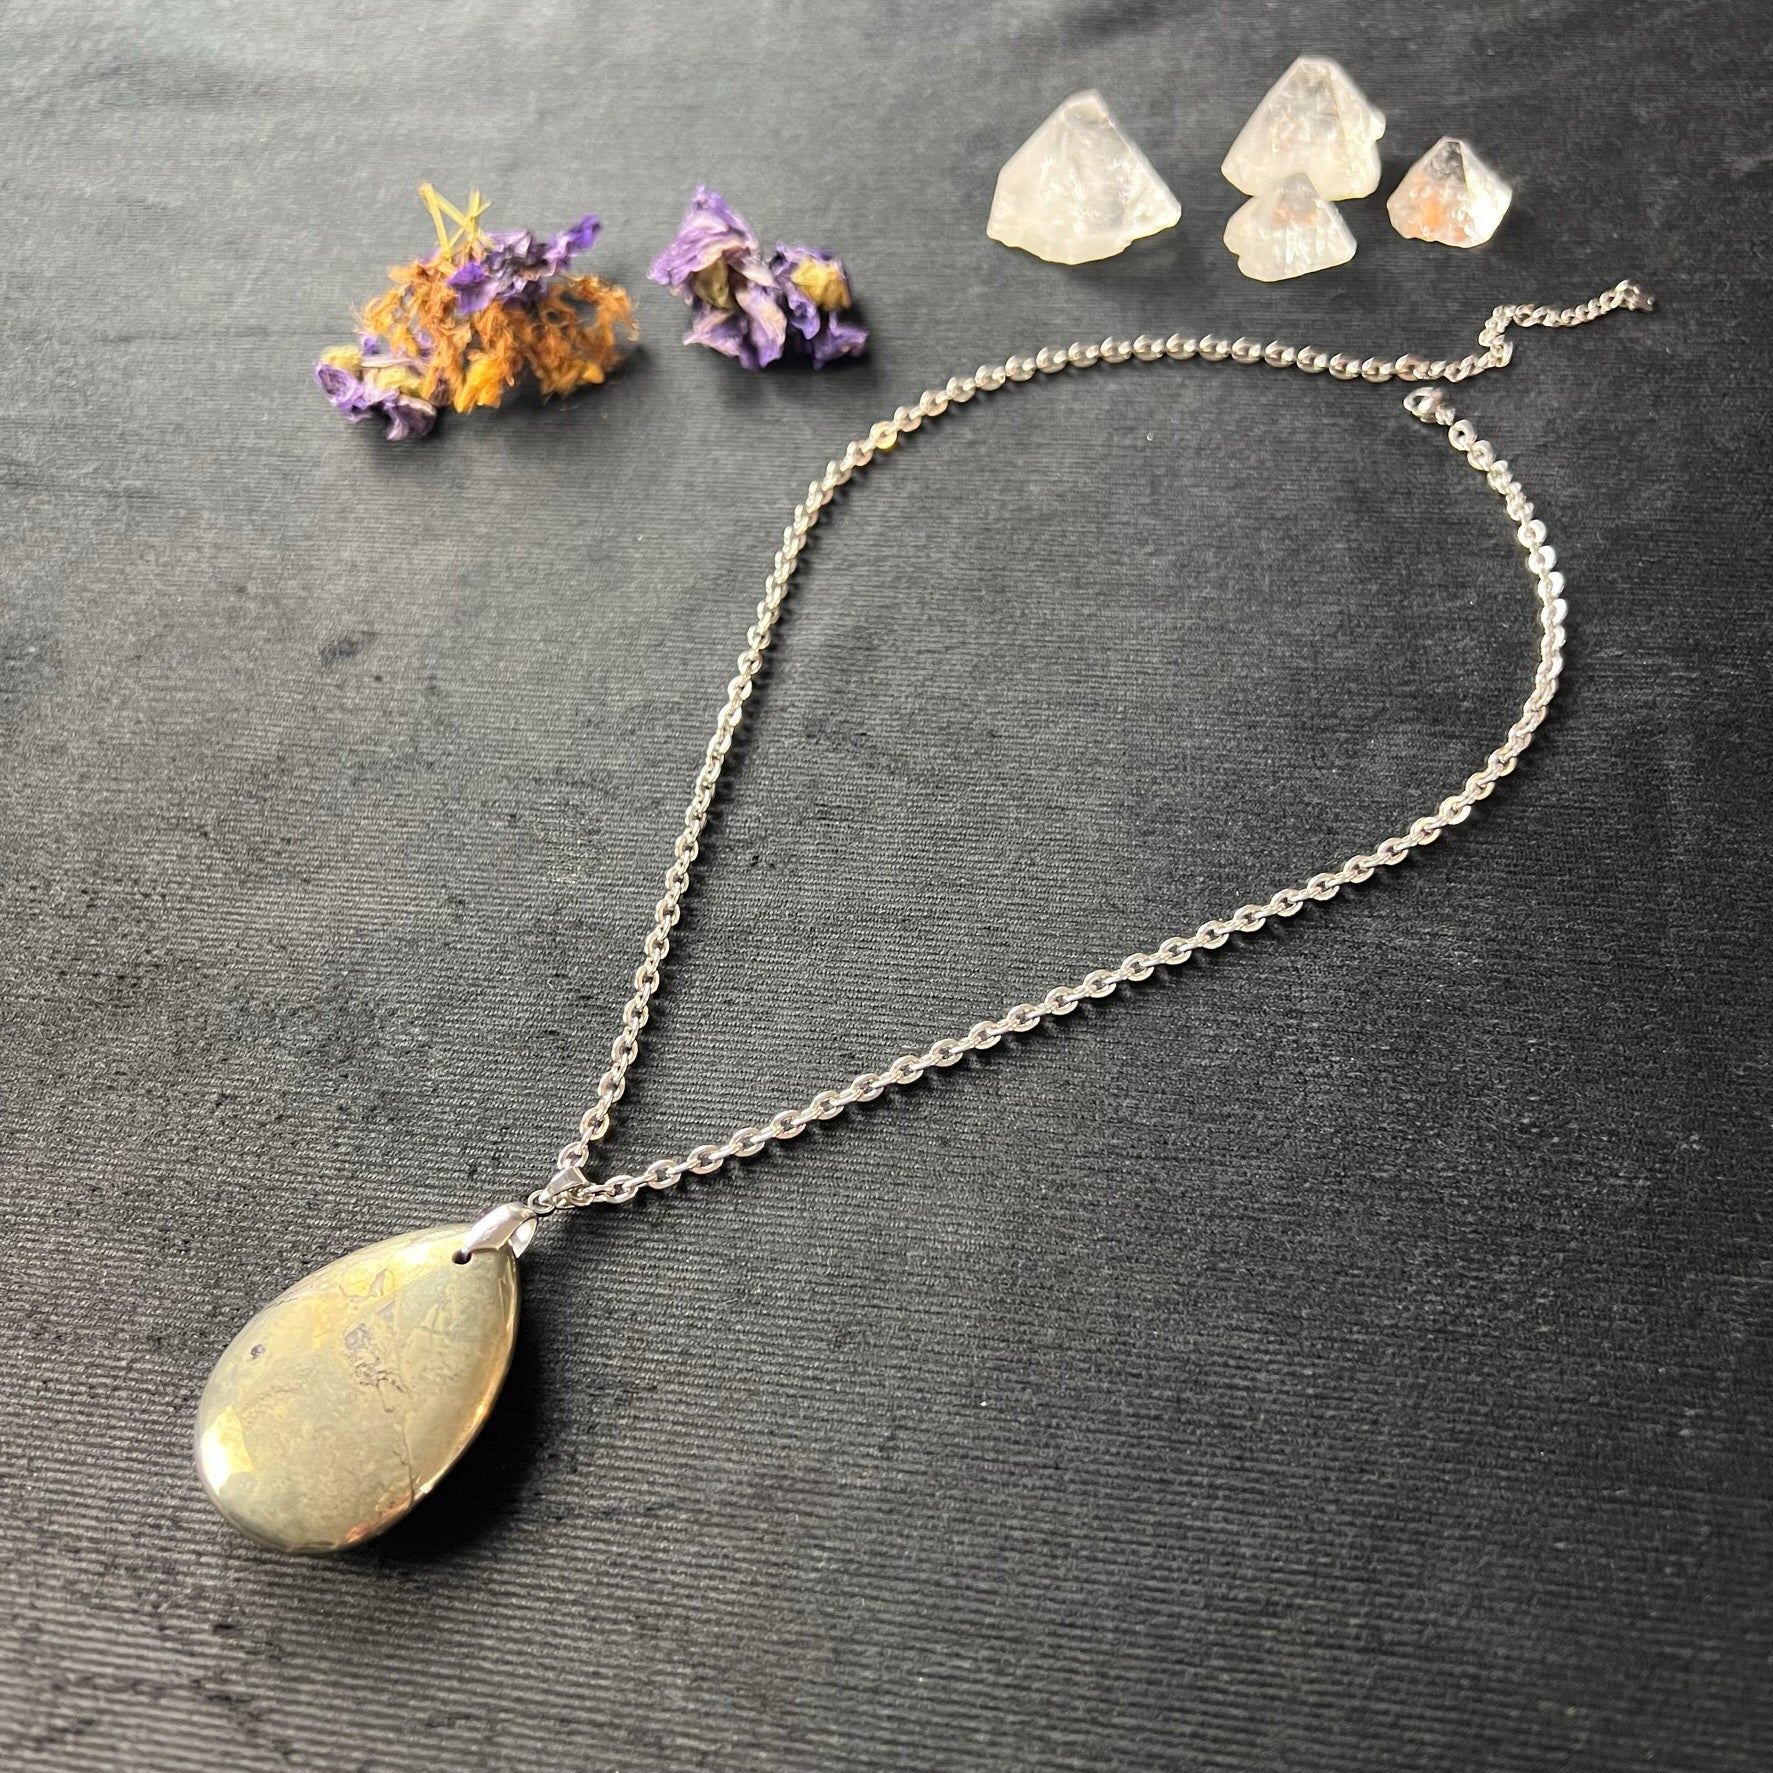 Teardrop Iron Pyrite gemstone and stainless steel necklace - The French Witch shop